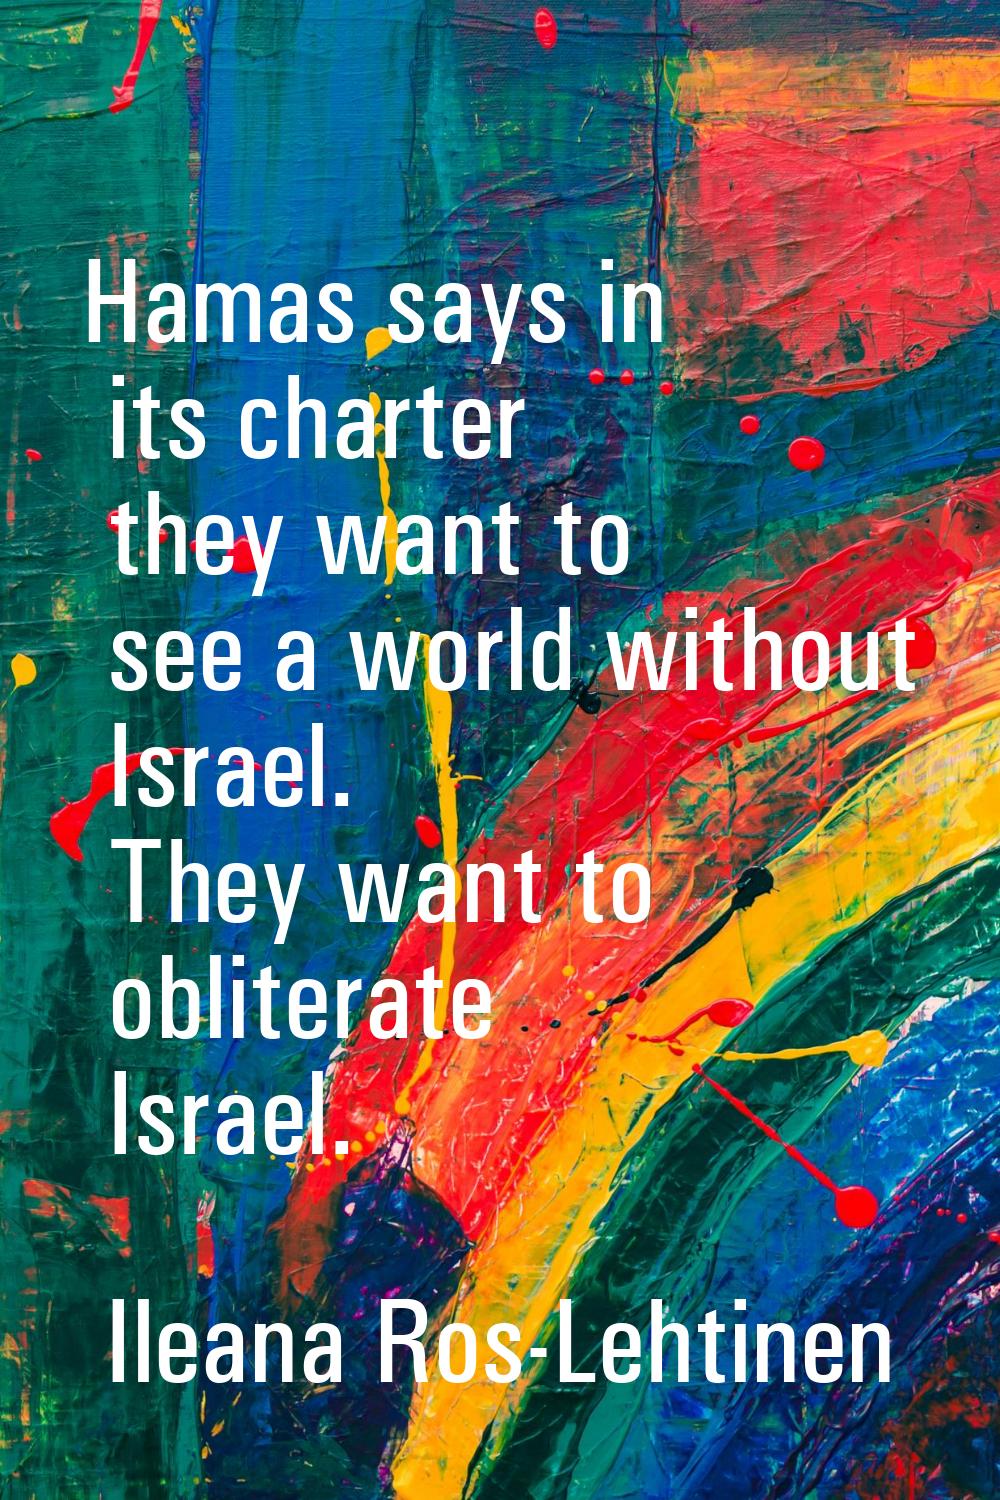 Hamas says in its charter they want to see a world without Israel. They want to obliterate Israel.